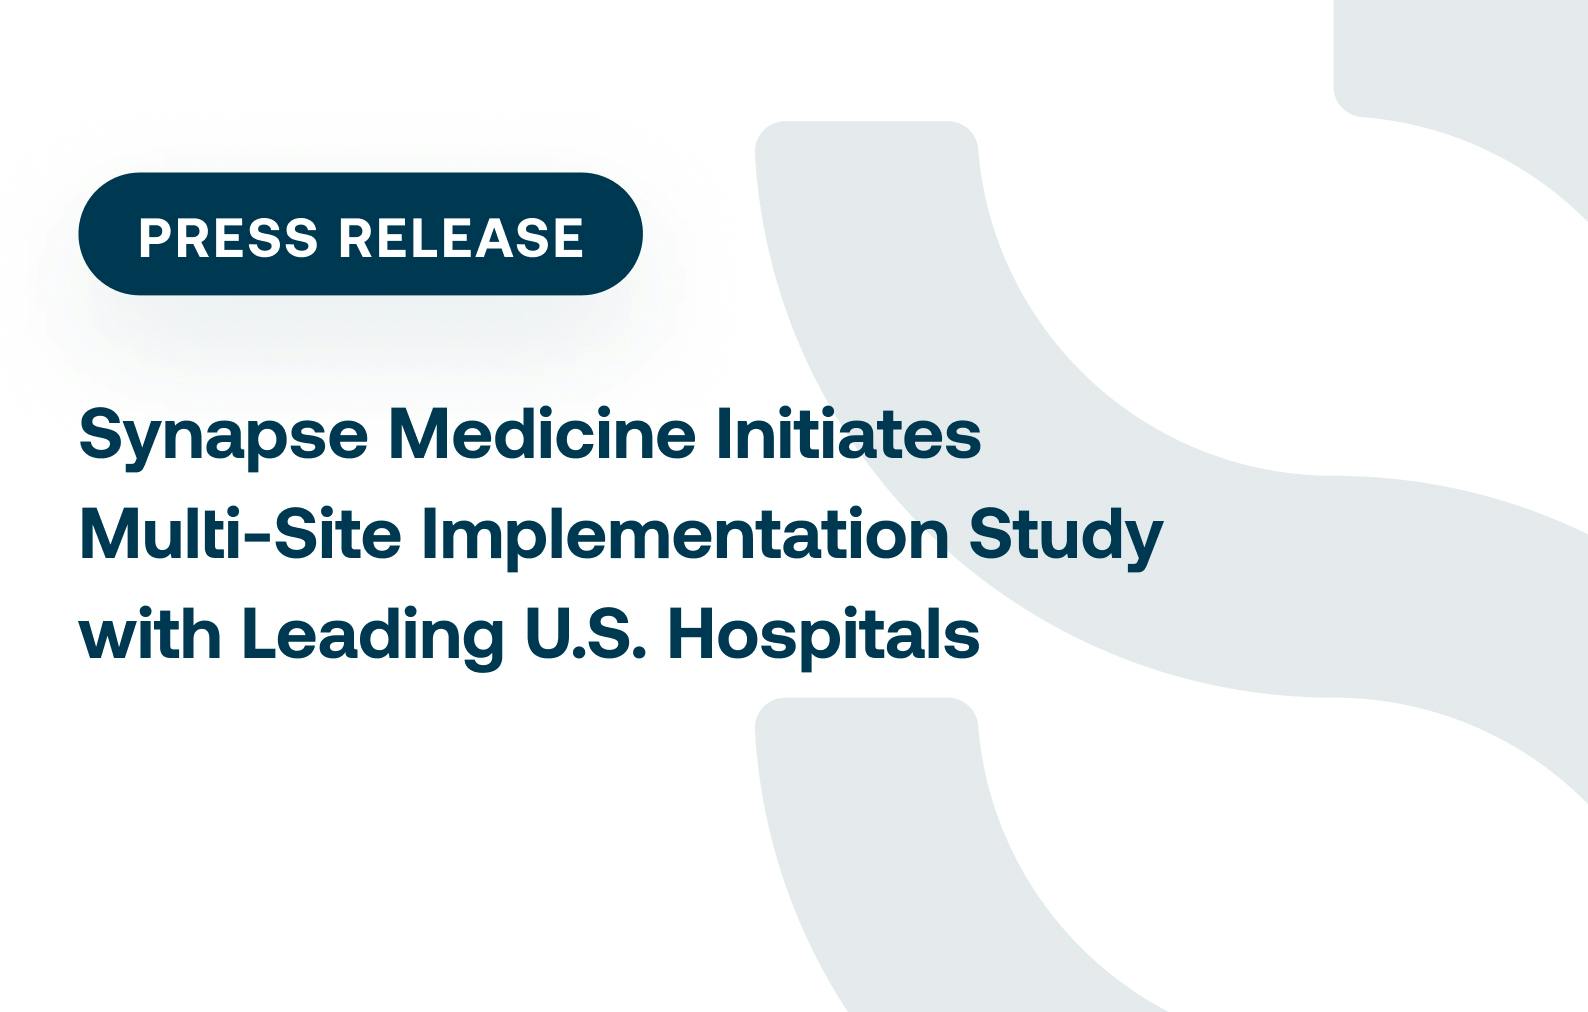 Synapse Medicine Initiates Multi-Site Implementation Study with Leading U.S Hospitals